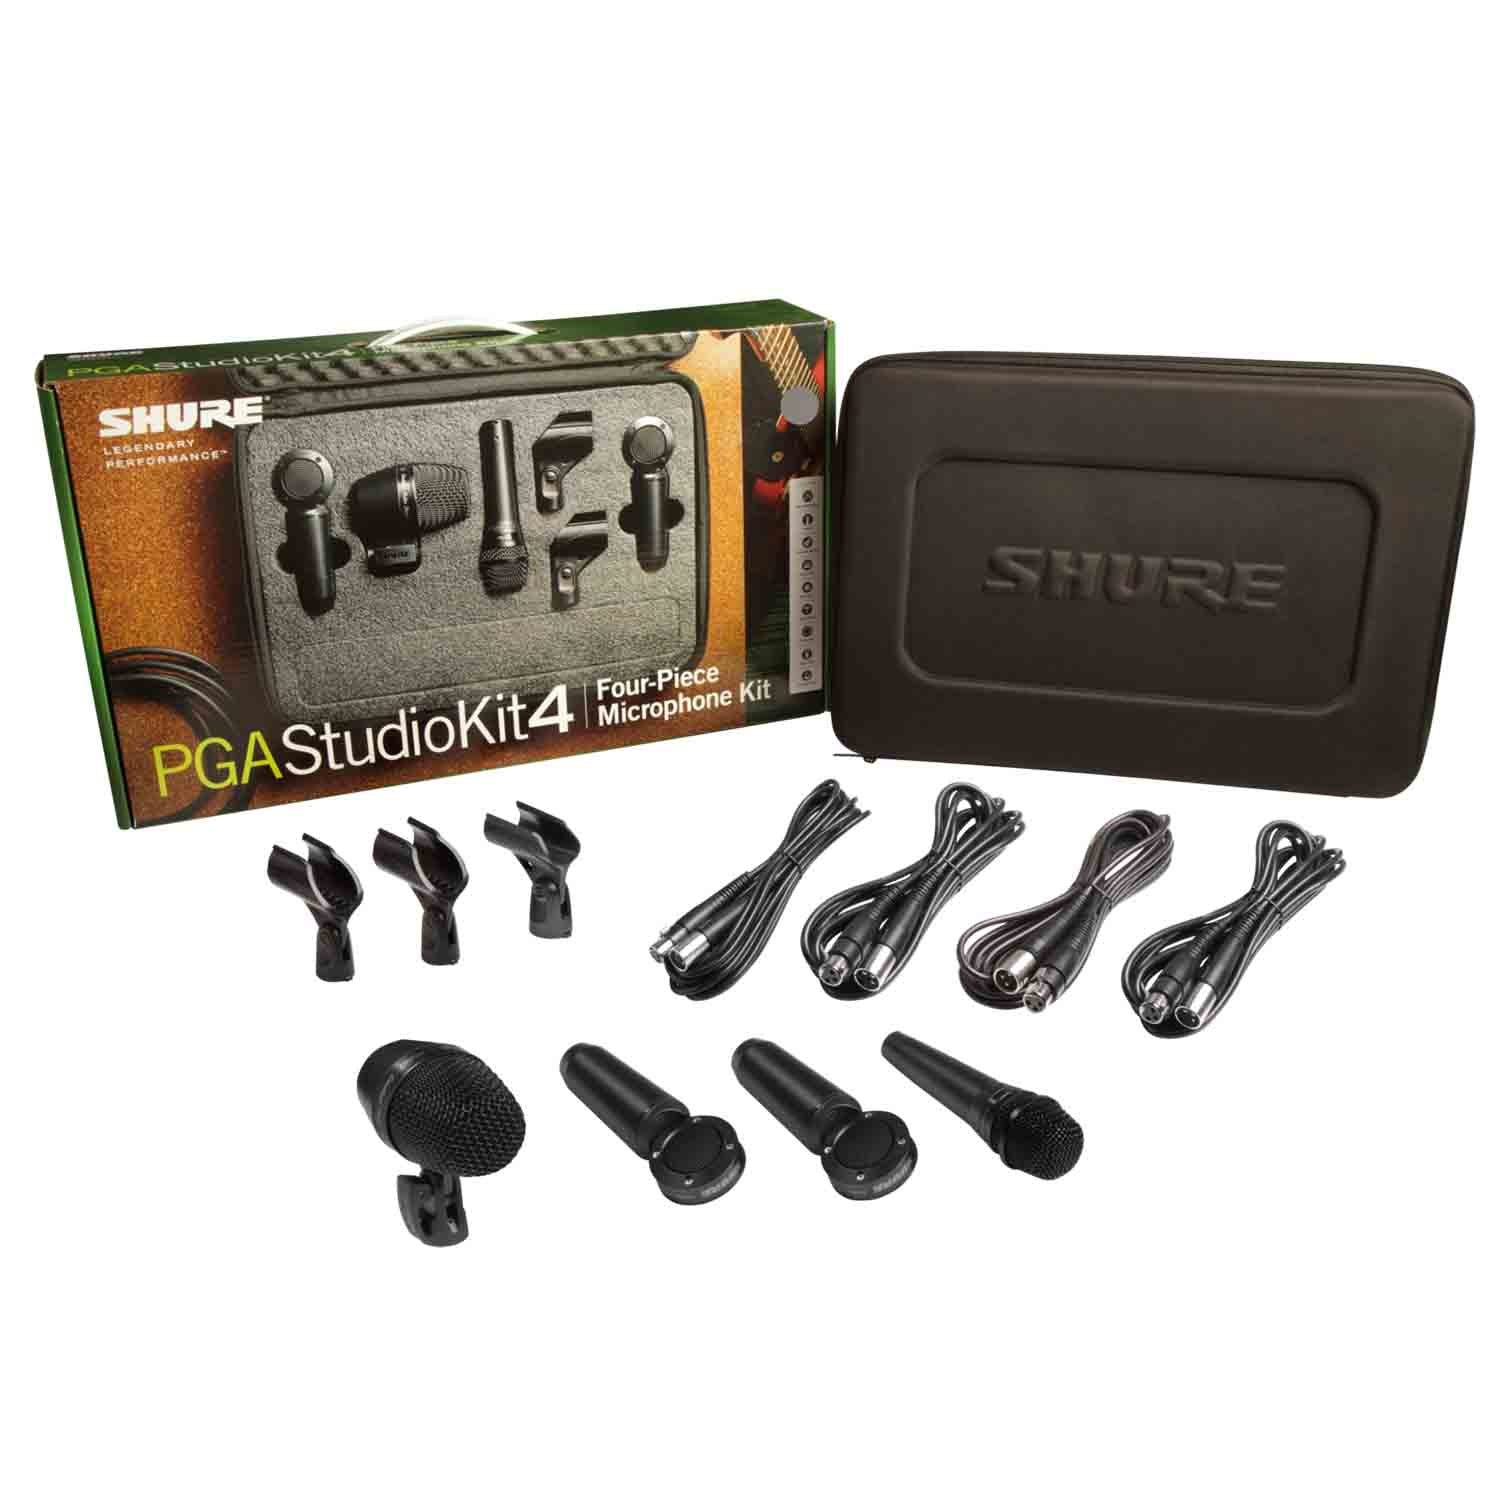 Shure PGA Studio Kit 4 Microphone Package with Clips Cables and Case | Open Box Shure